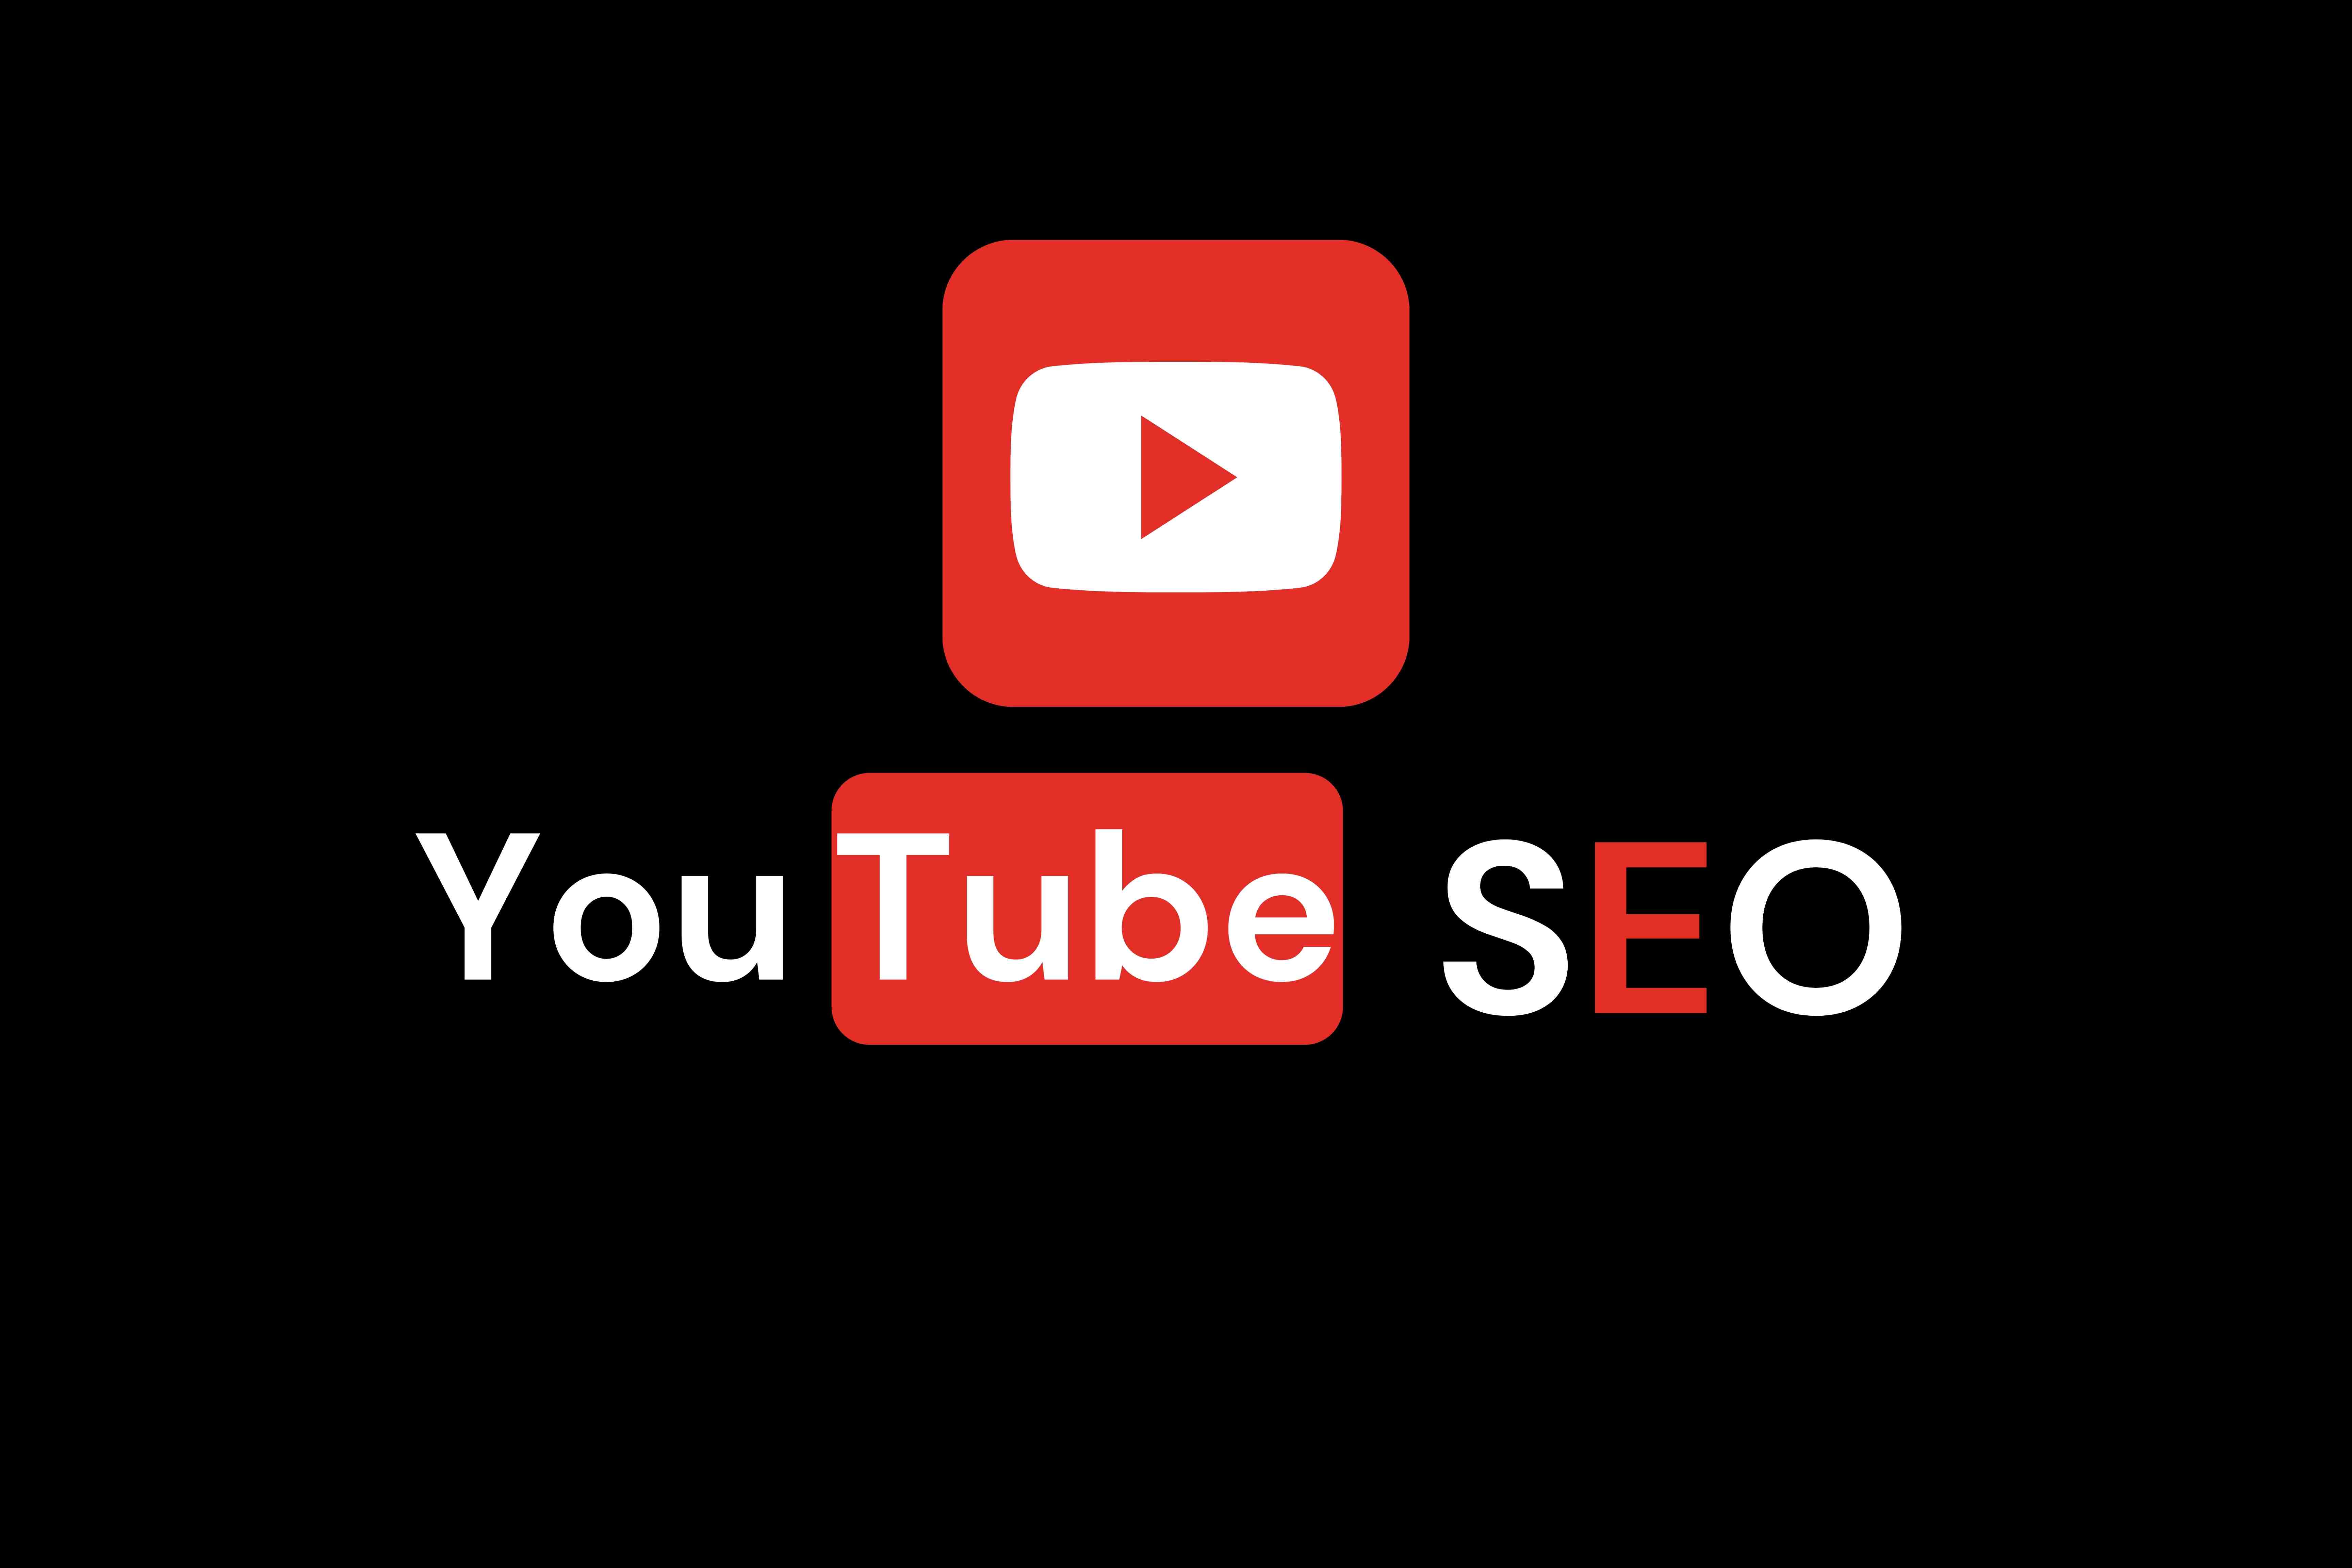 Using YouTube SEO to Drive Traffic to Your Website